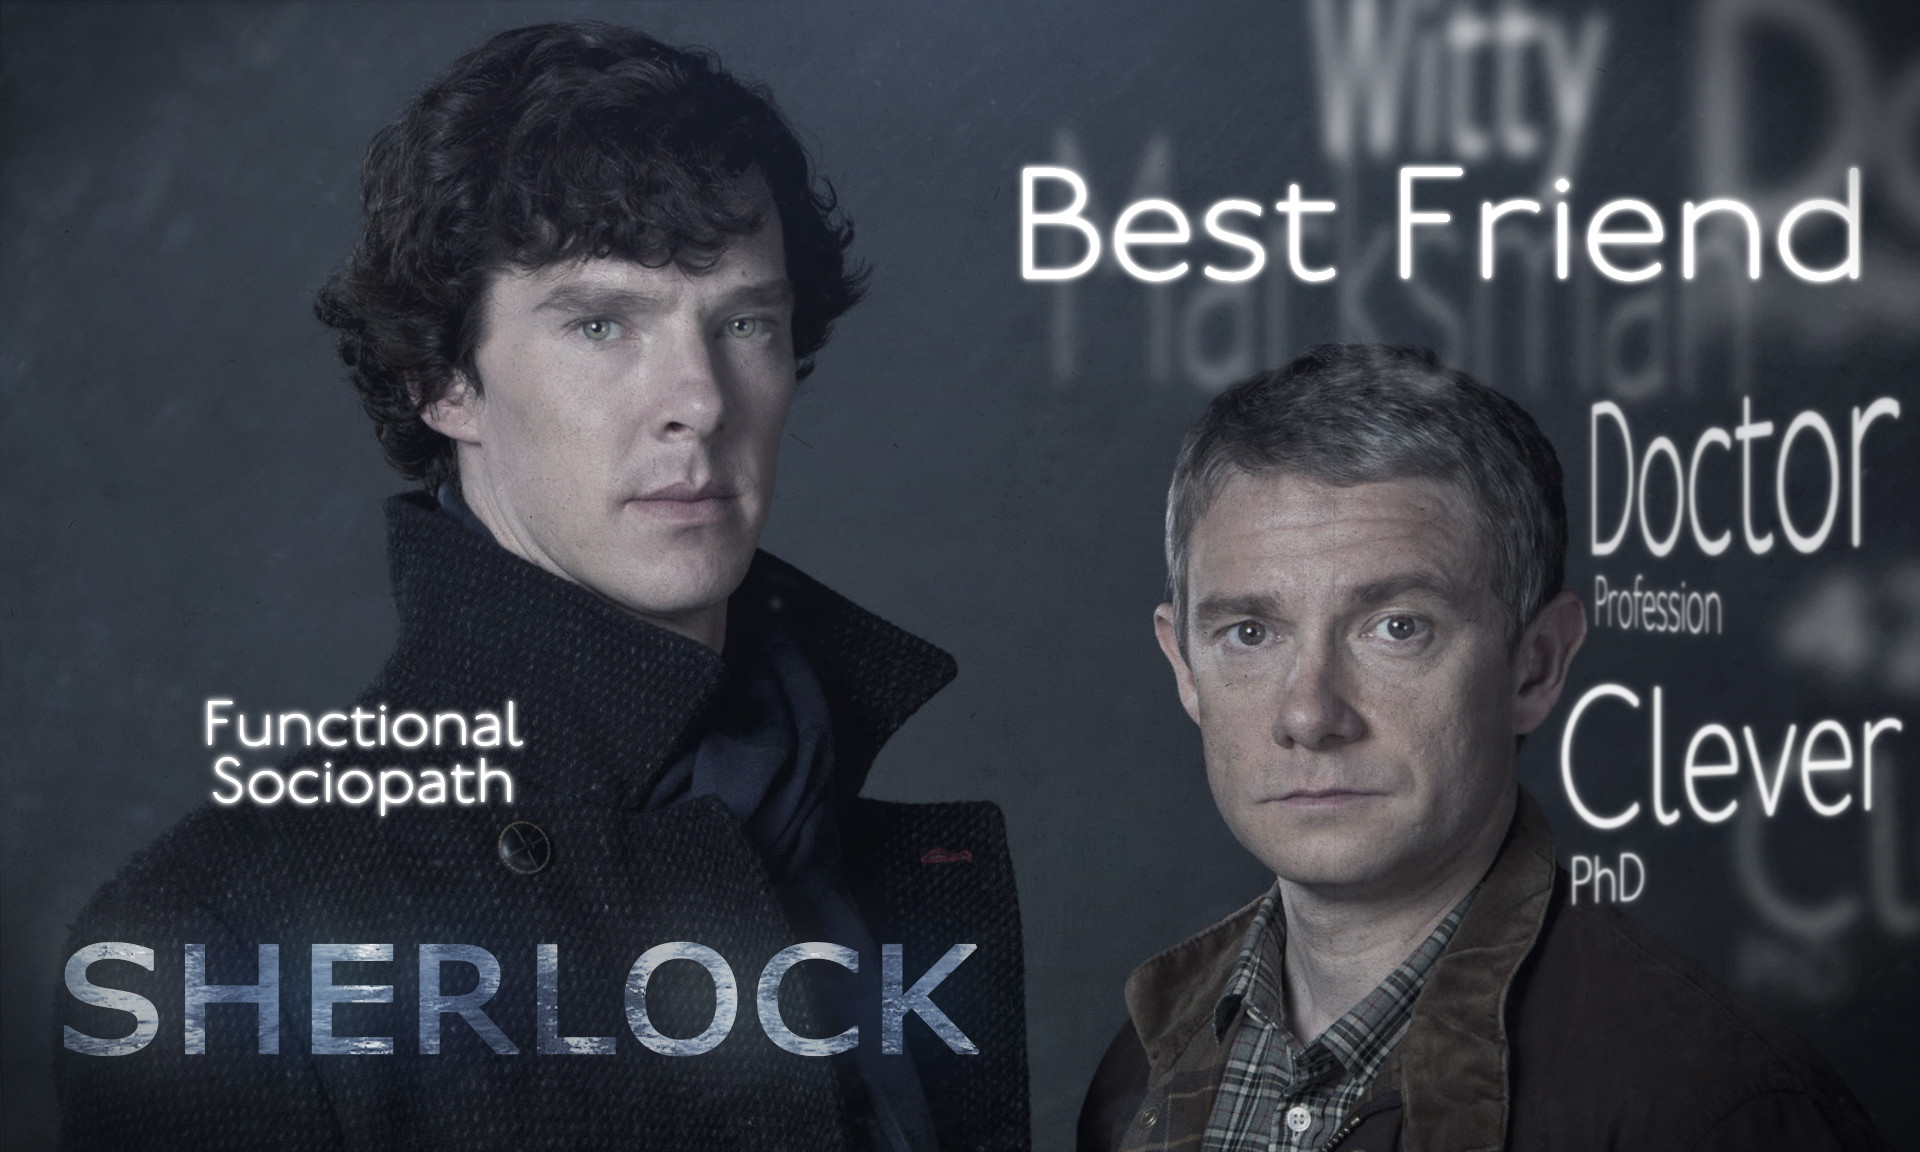 1920x1152 images sherlock wallpaper by aplovelace holmes windows wallpapers hd  download free amazing cool windows 10 tablet 1920Ã1152 Wallpaper HD